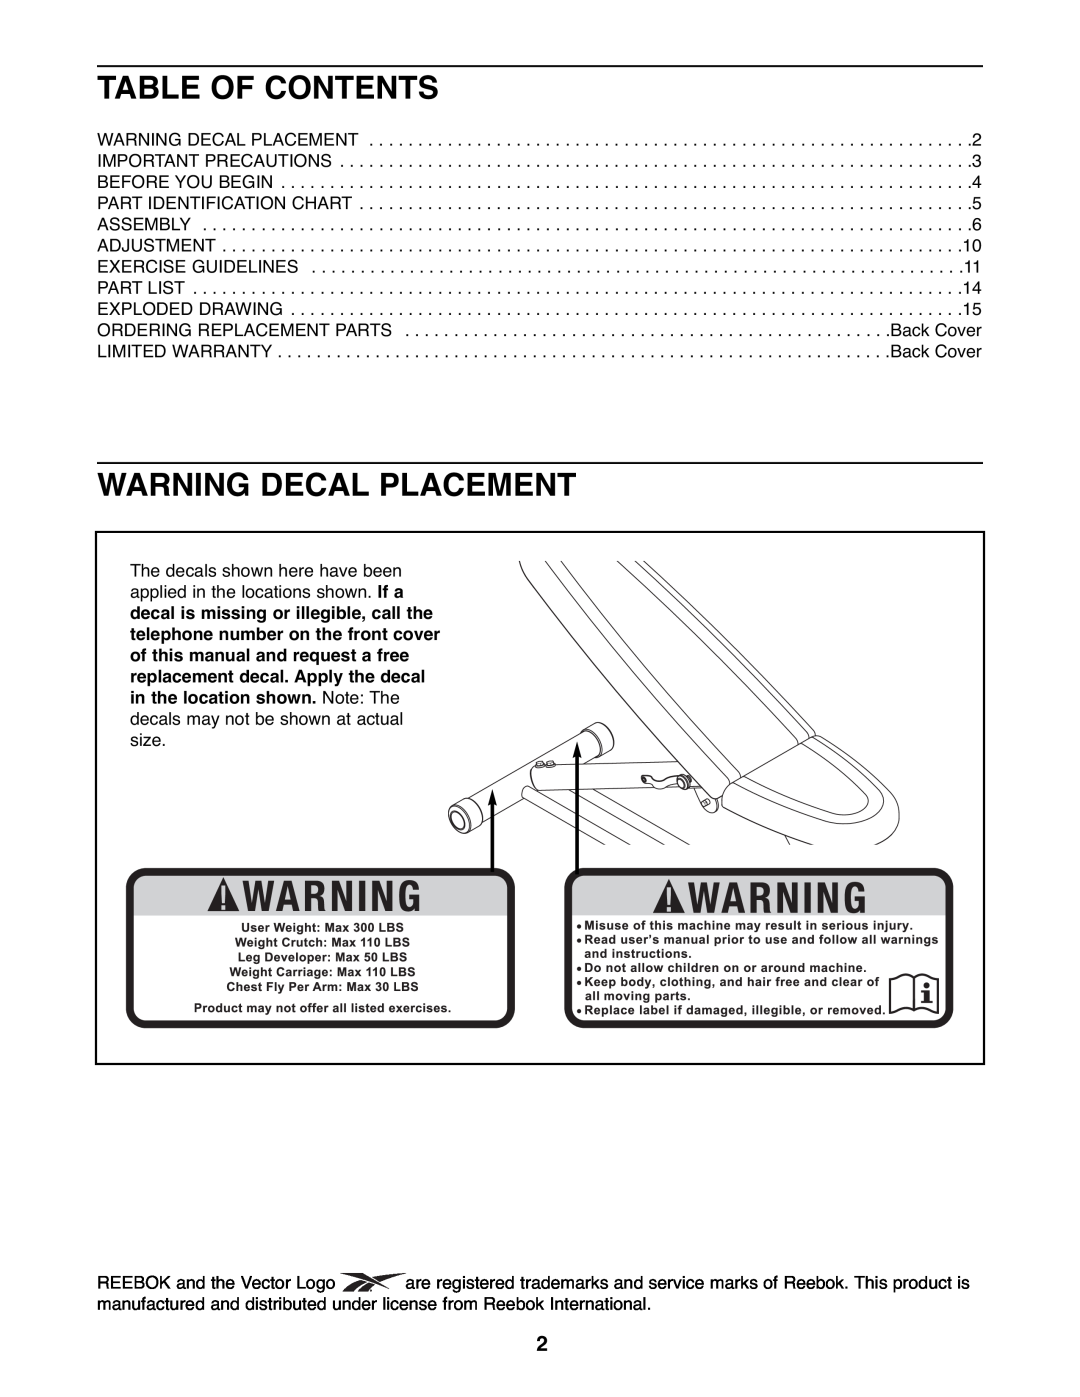 Reebok Fitness RBBE0787.1 manual Table Of Contents, Warning Decal Placement 